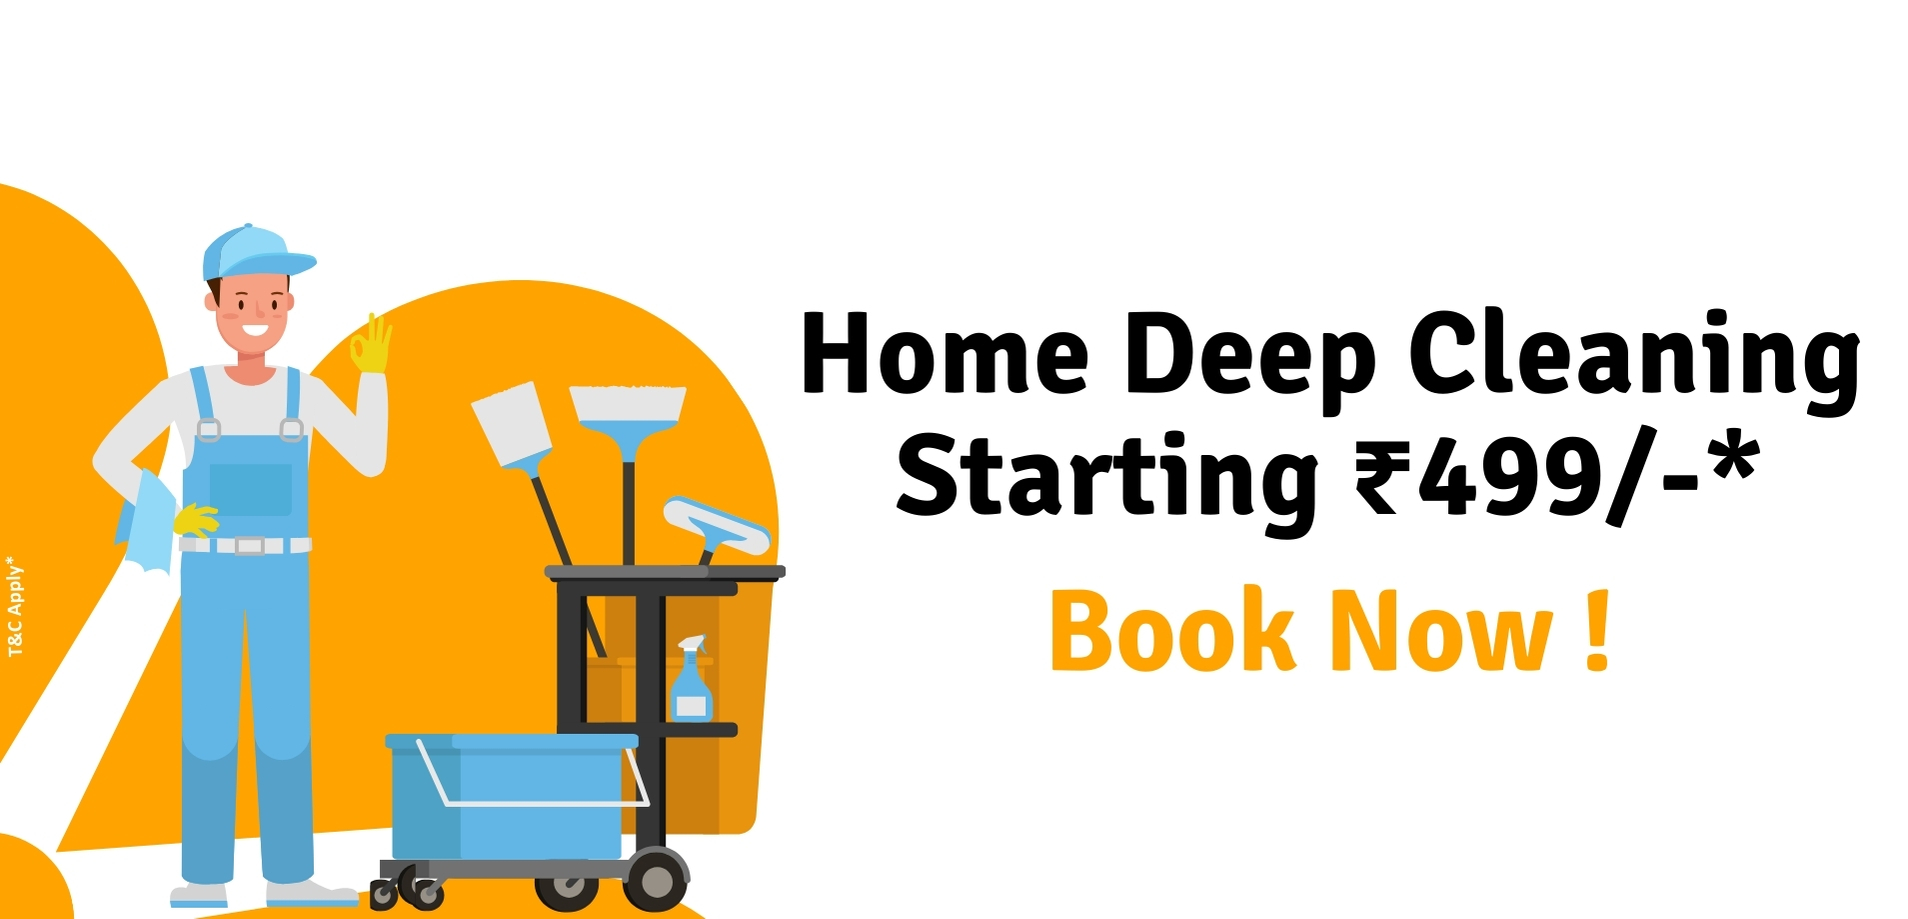 Home deep cleaning Category